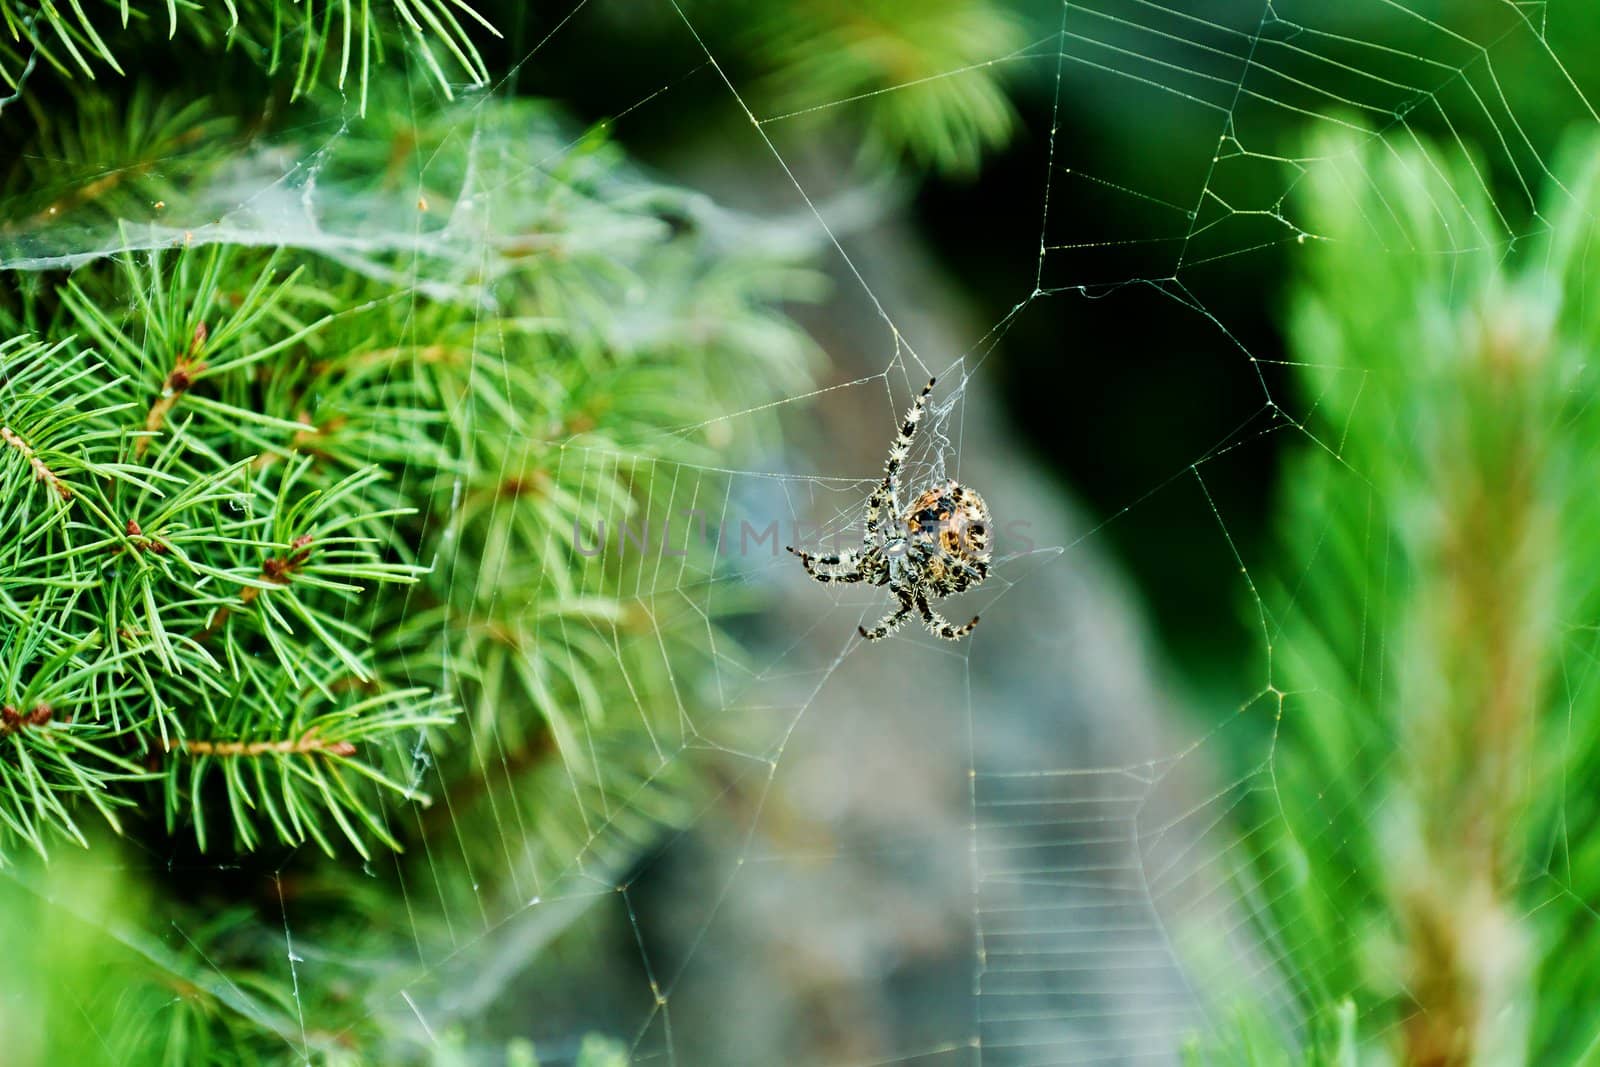 Fairly Large spider with shallow depth of field against a green background